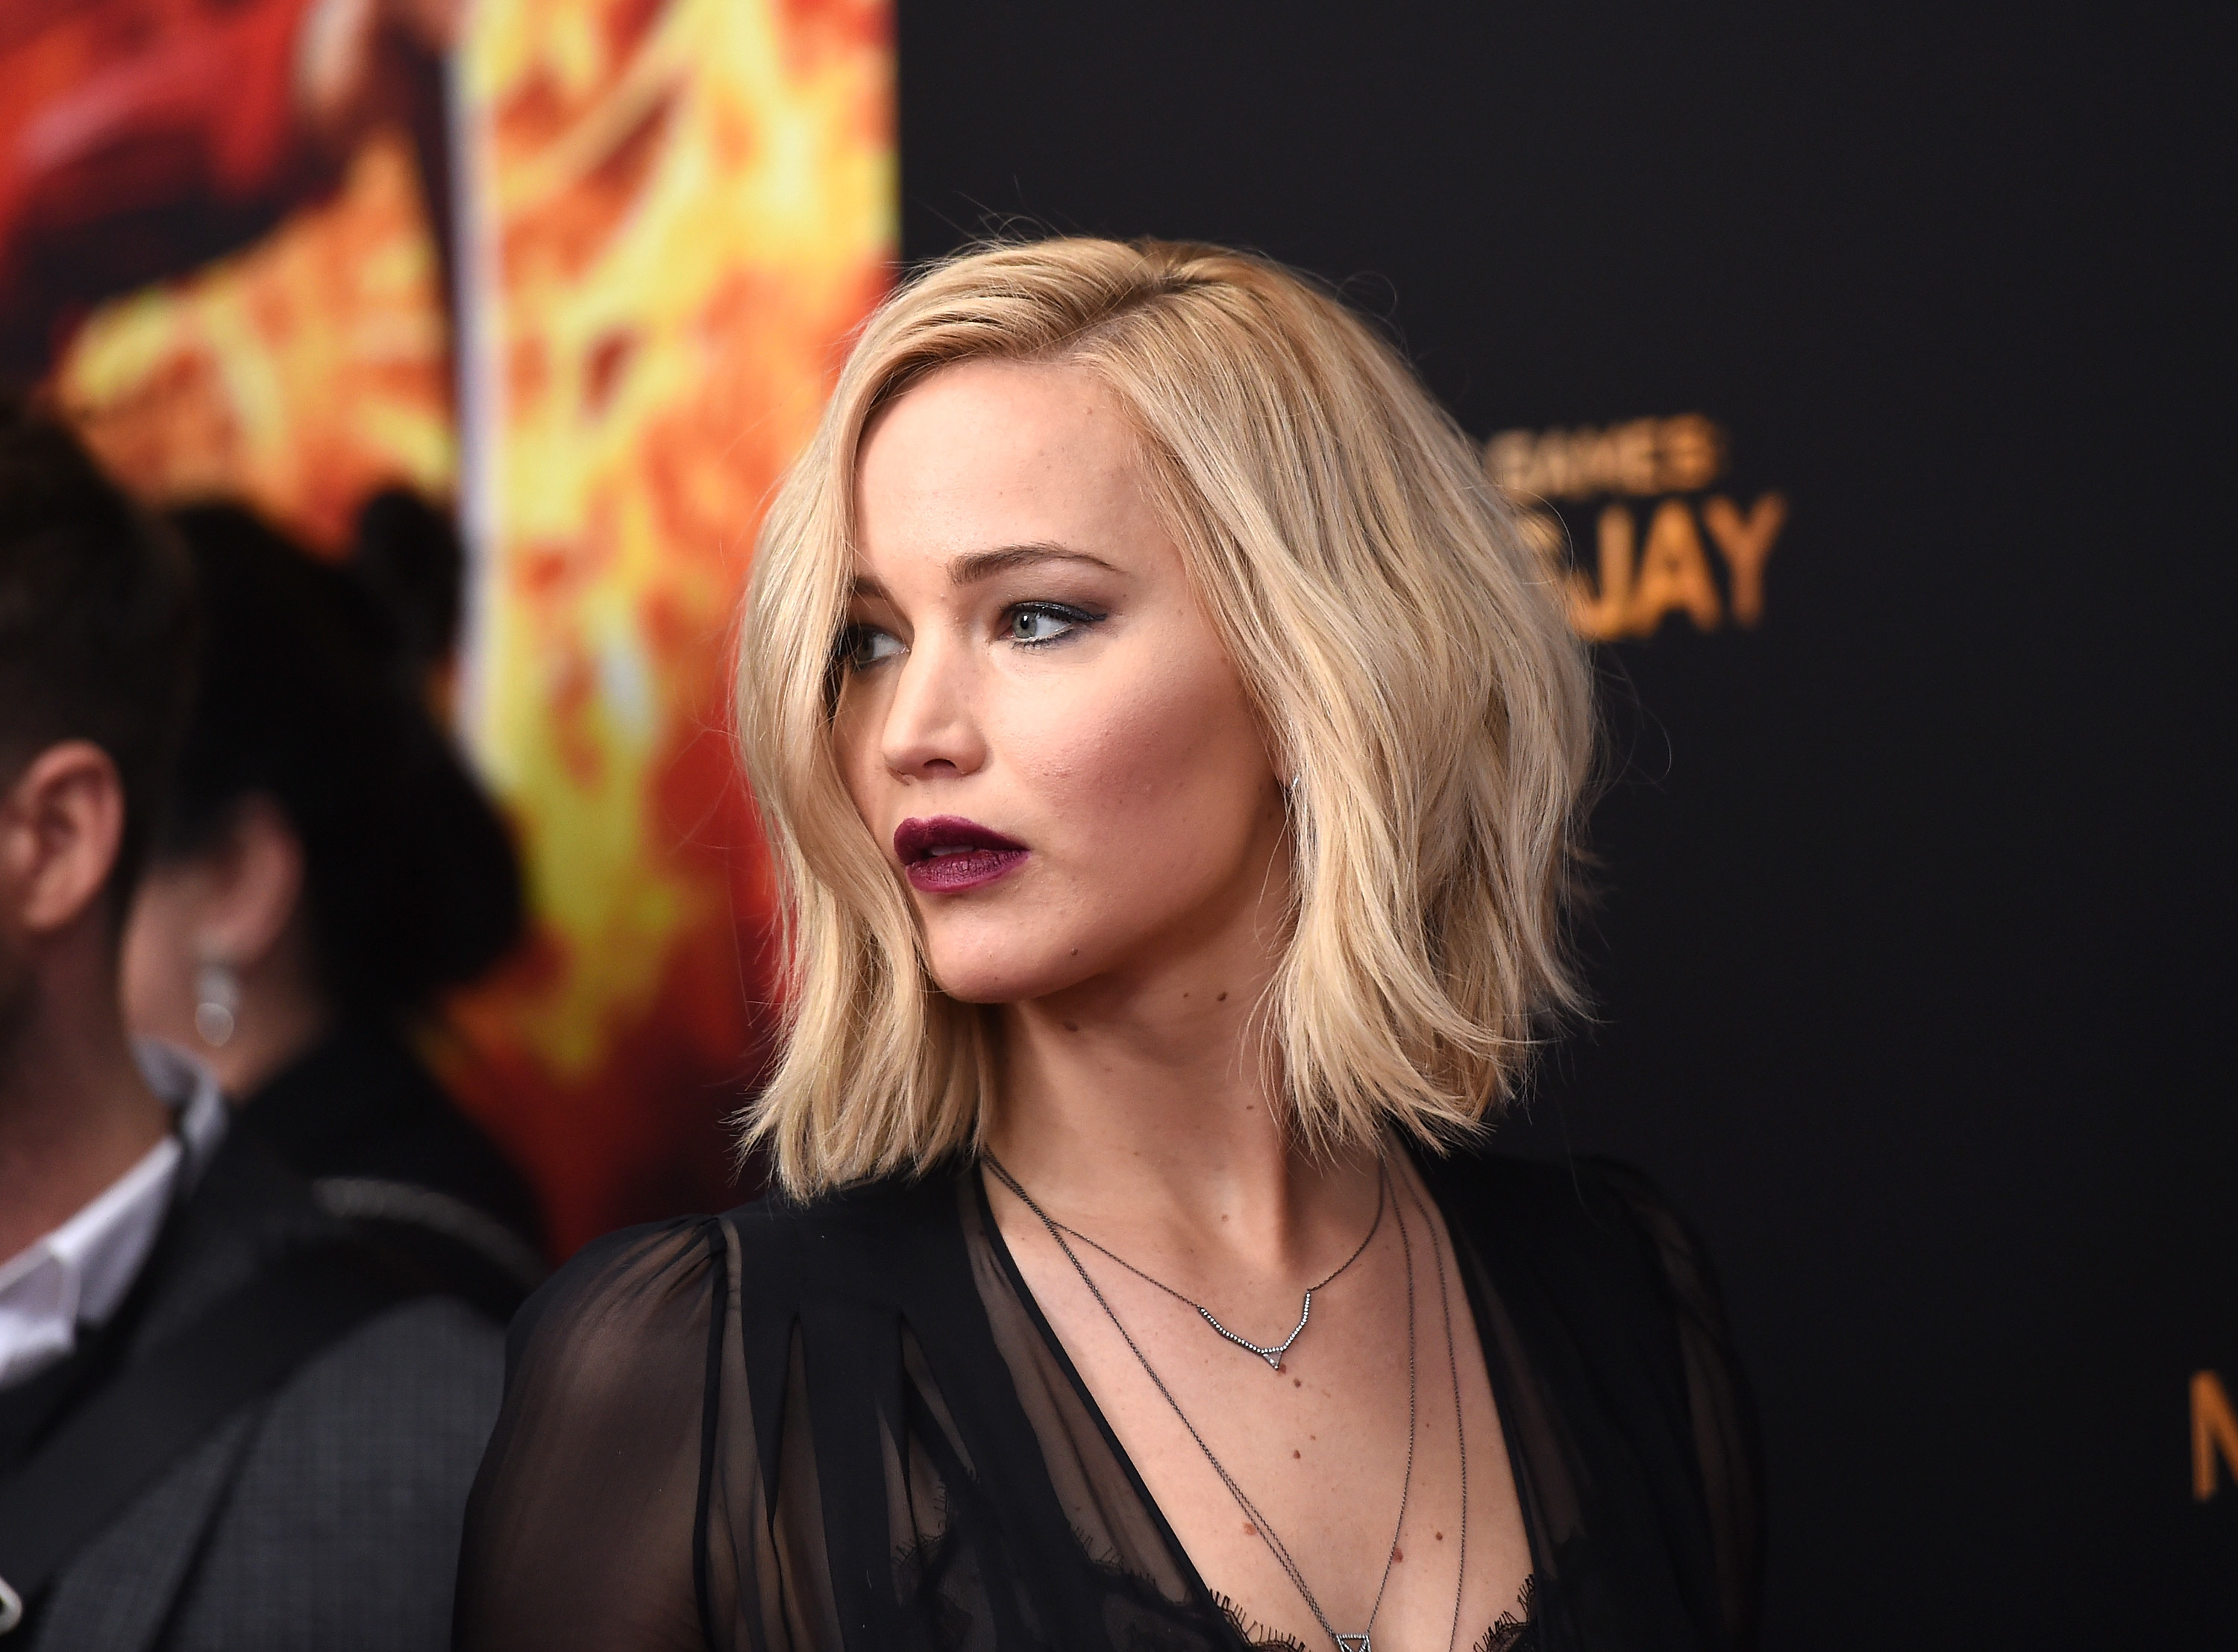 Close-up of JLaw with dramatic lip color and eye makeup